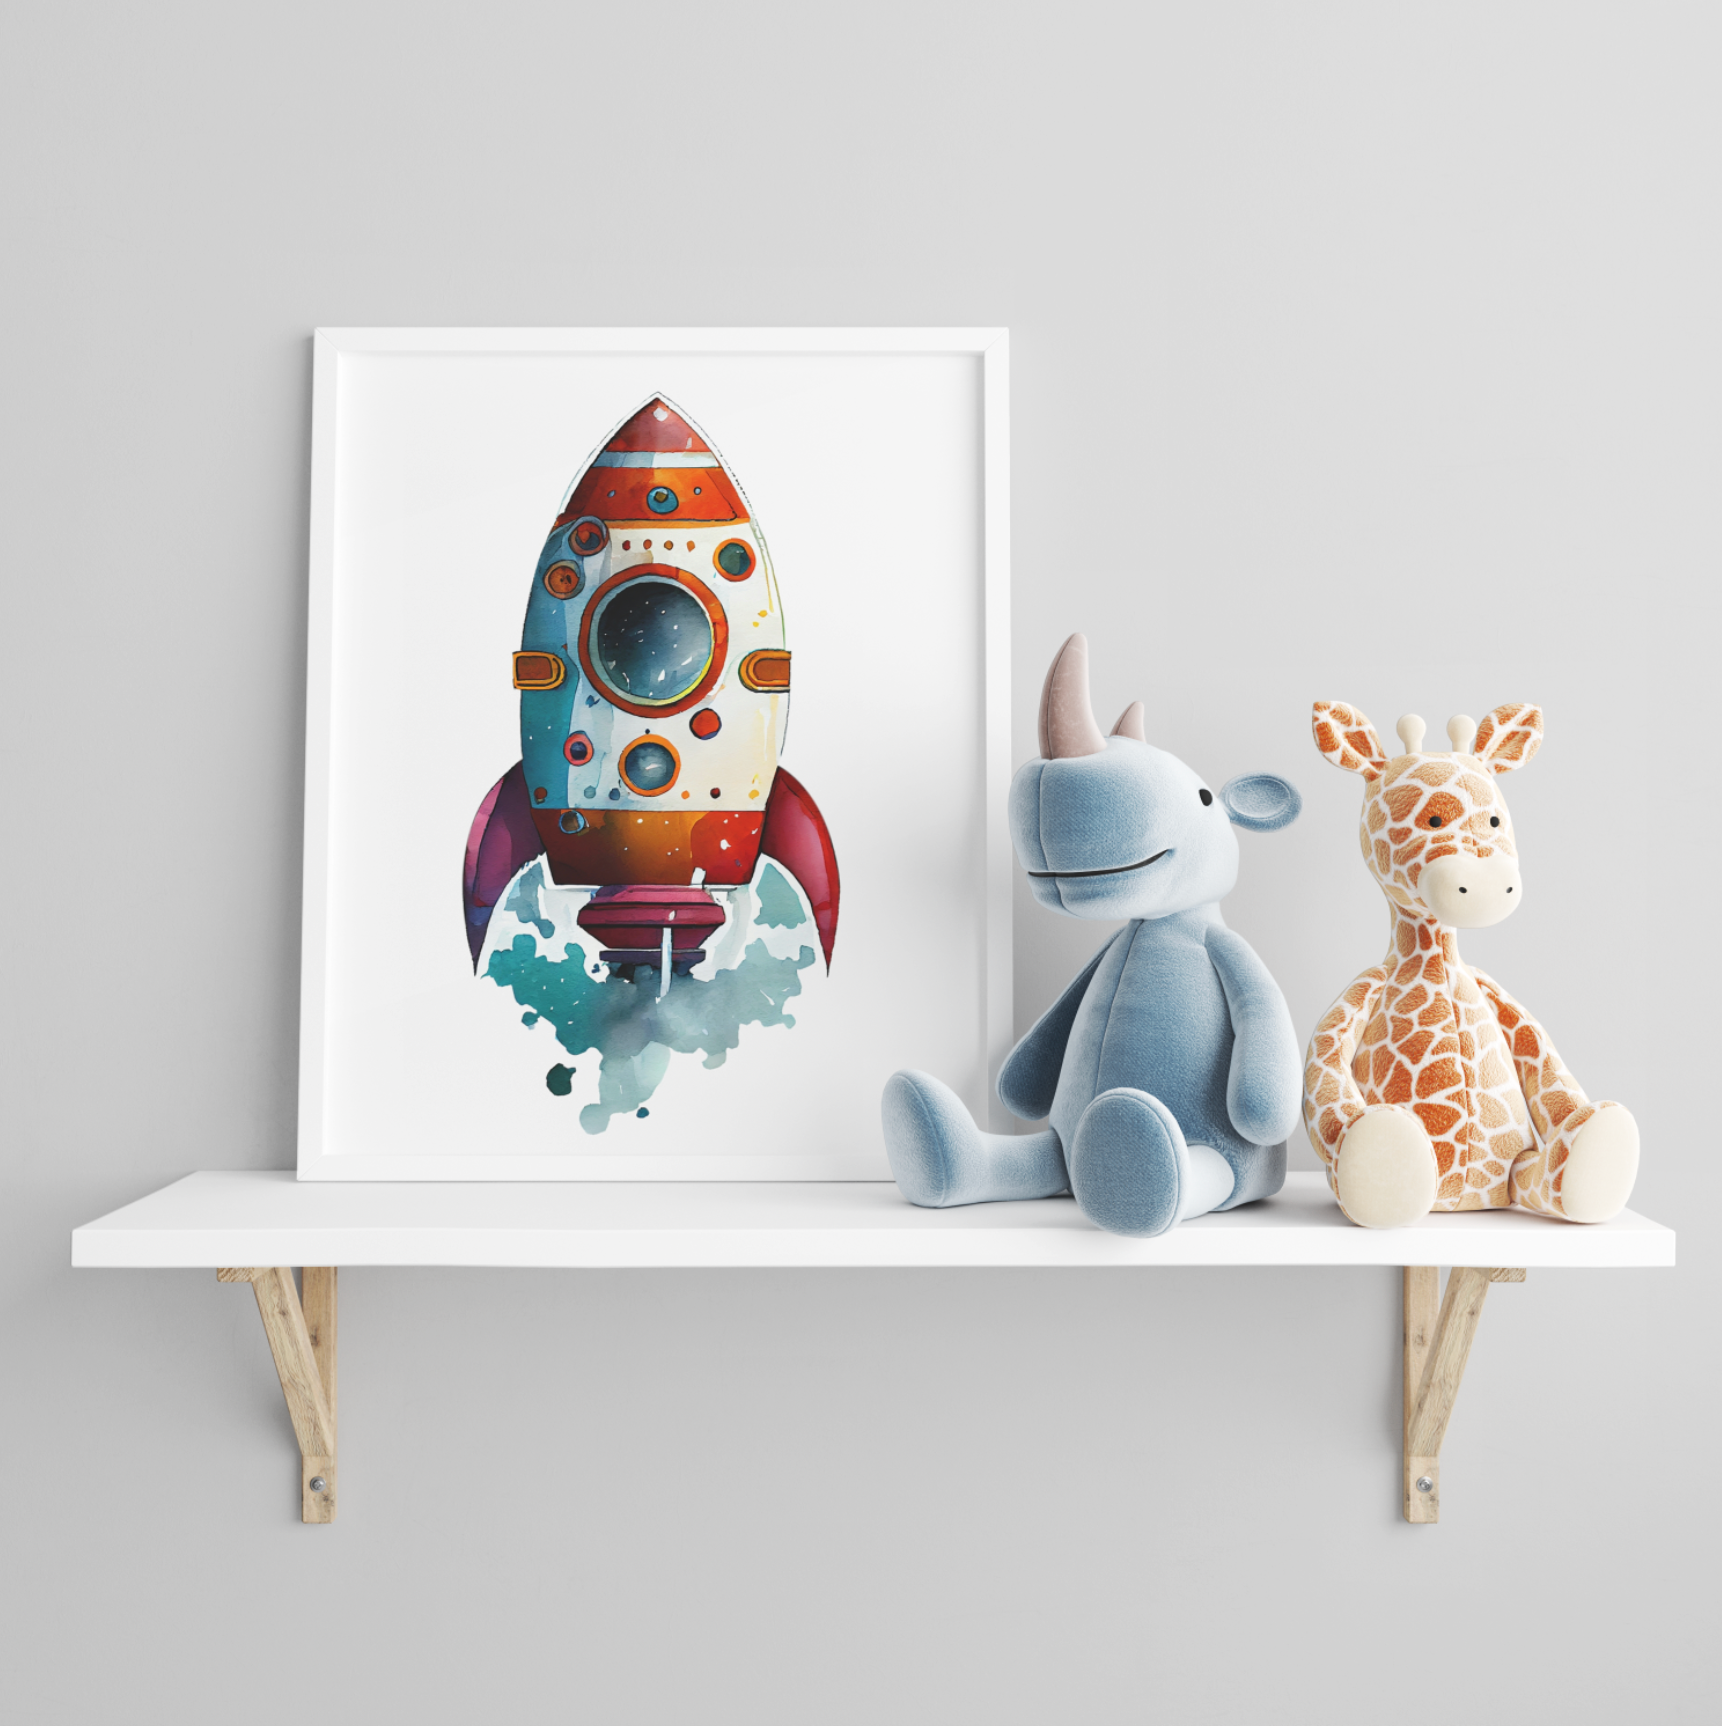 red rocket ship poster wall art, space theme poster for kids room